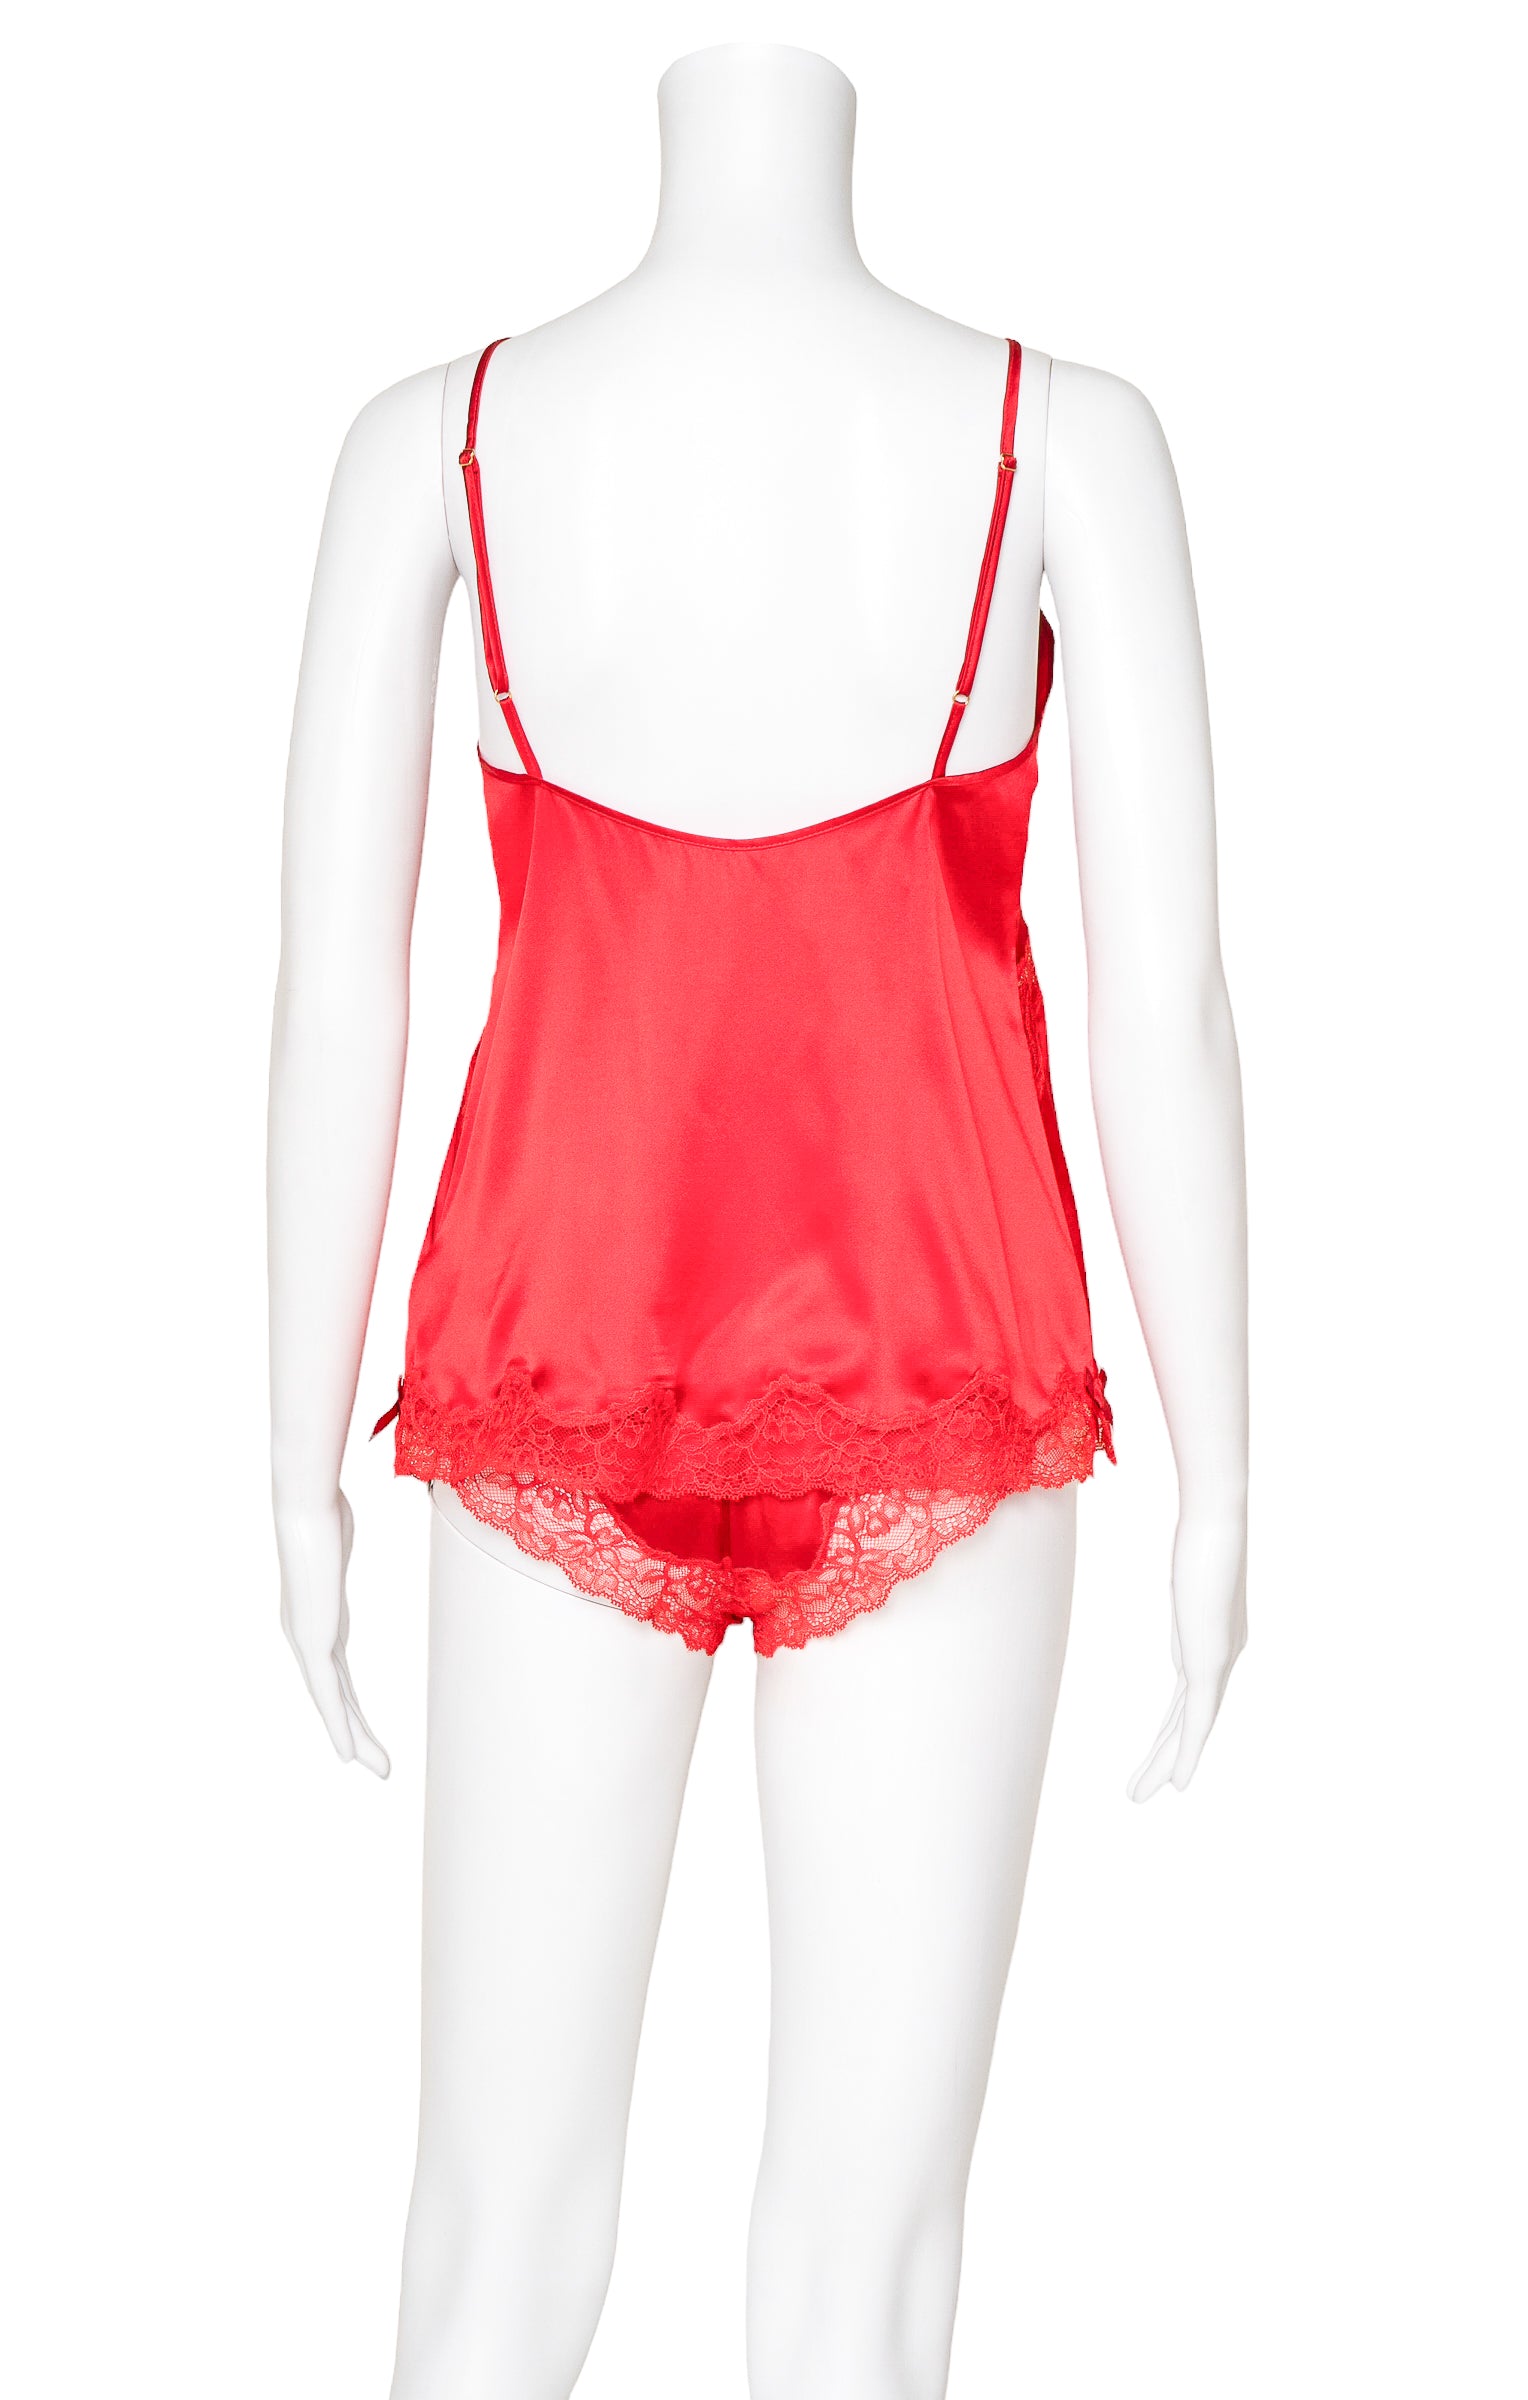 AGENT PROVOCATEUR (NEW) with tags Set Size: Marked a size 4, fits like L